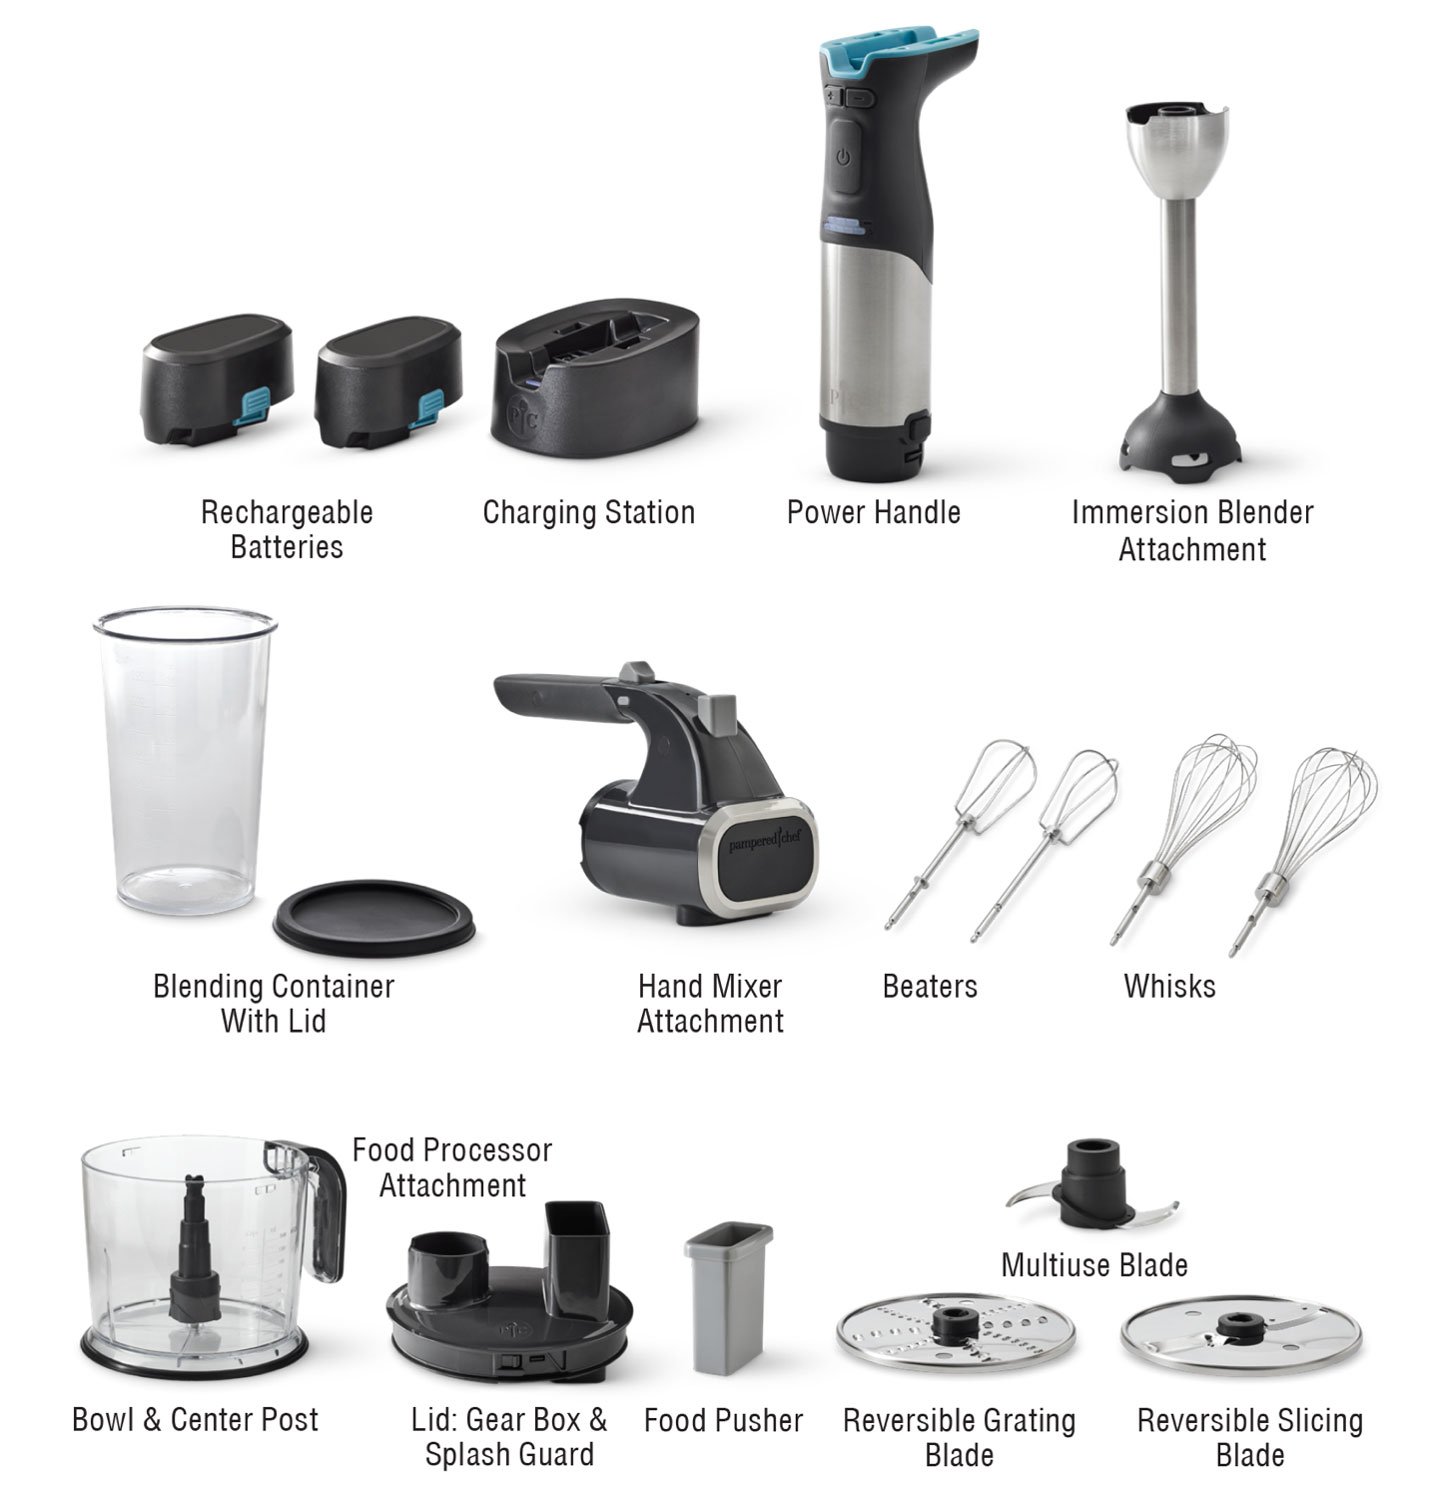 Rechargeable batteries, charging station, power handle, immersion blender attachment, blending container with lid, hand mixer attachment, beaters, whisks, bowl & center post, prood processor attachment, lid: gear box & splash guard, food pusher, multiuse blade, reversible grating blade, and reversible slicing blade